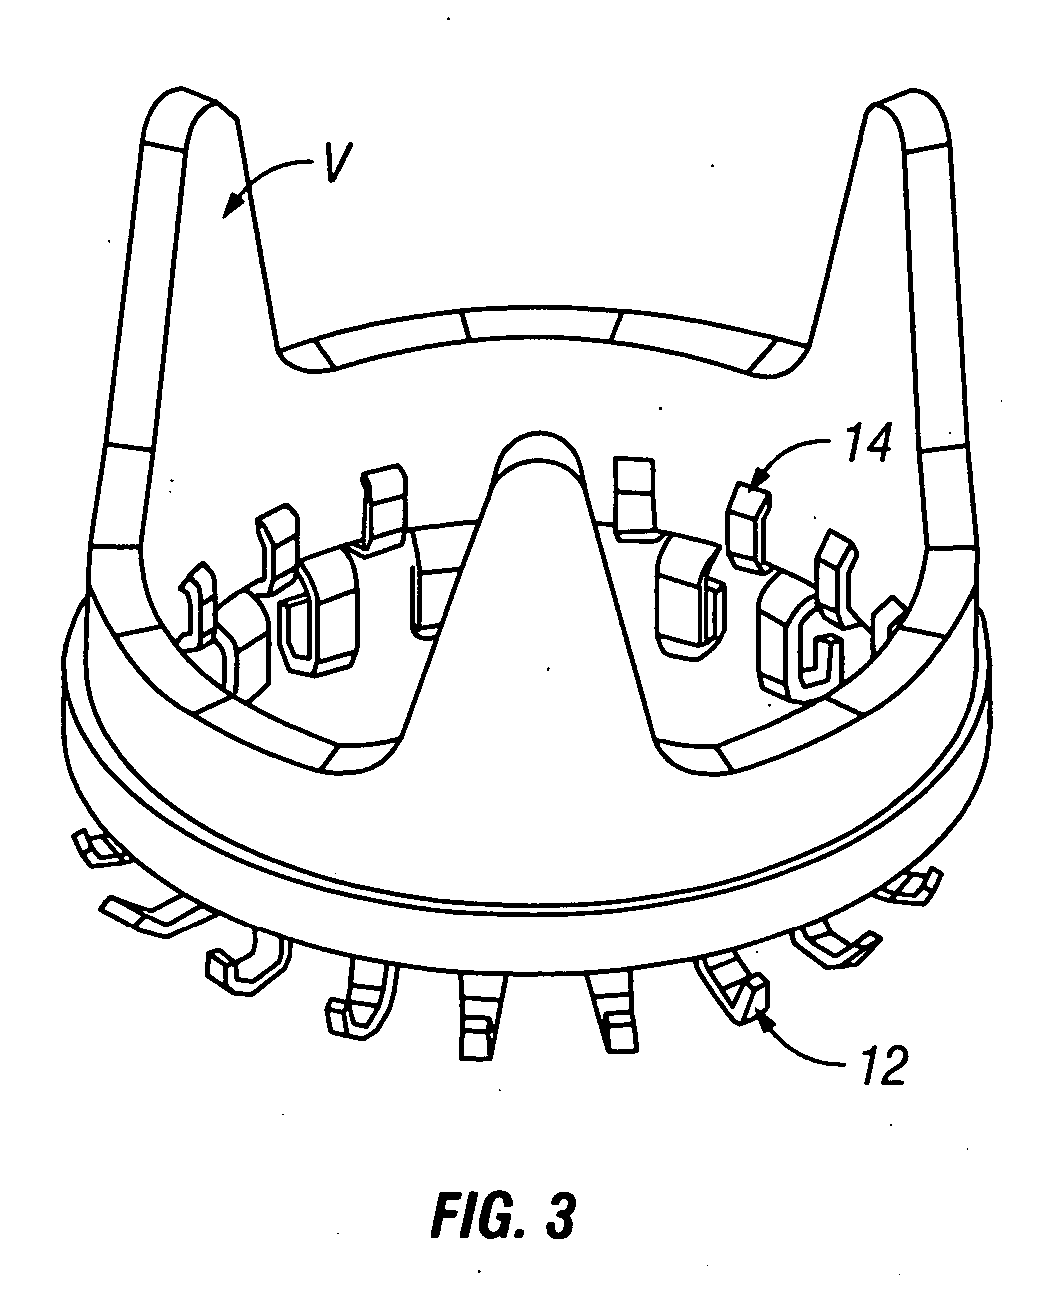 Ring-shaped valve prosthesis attachment device